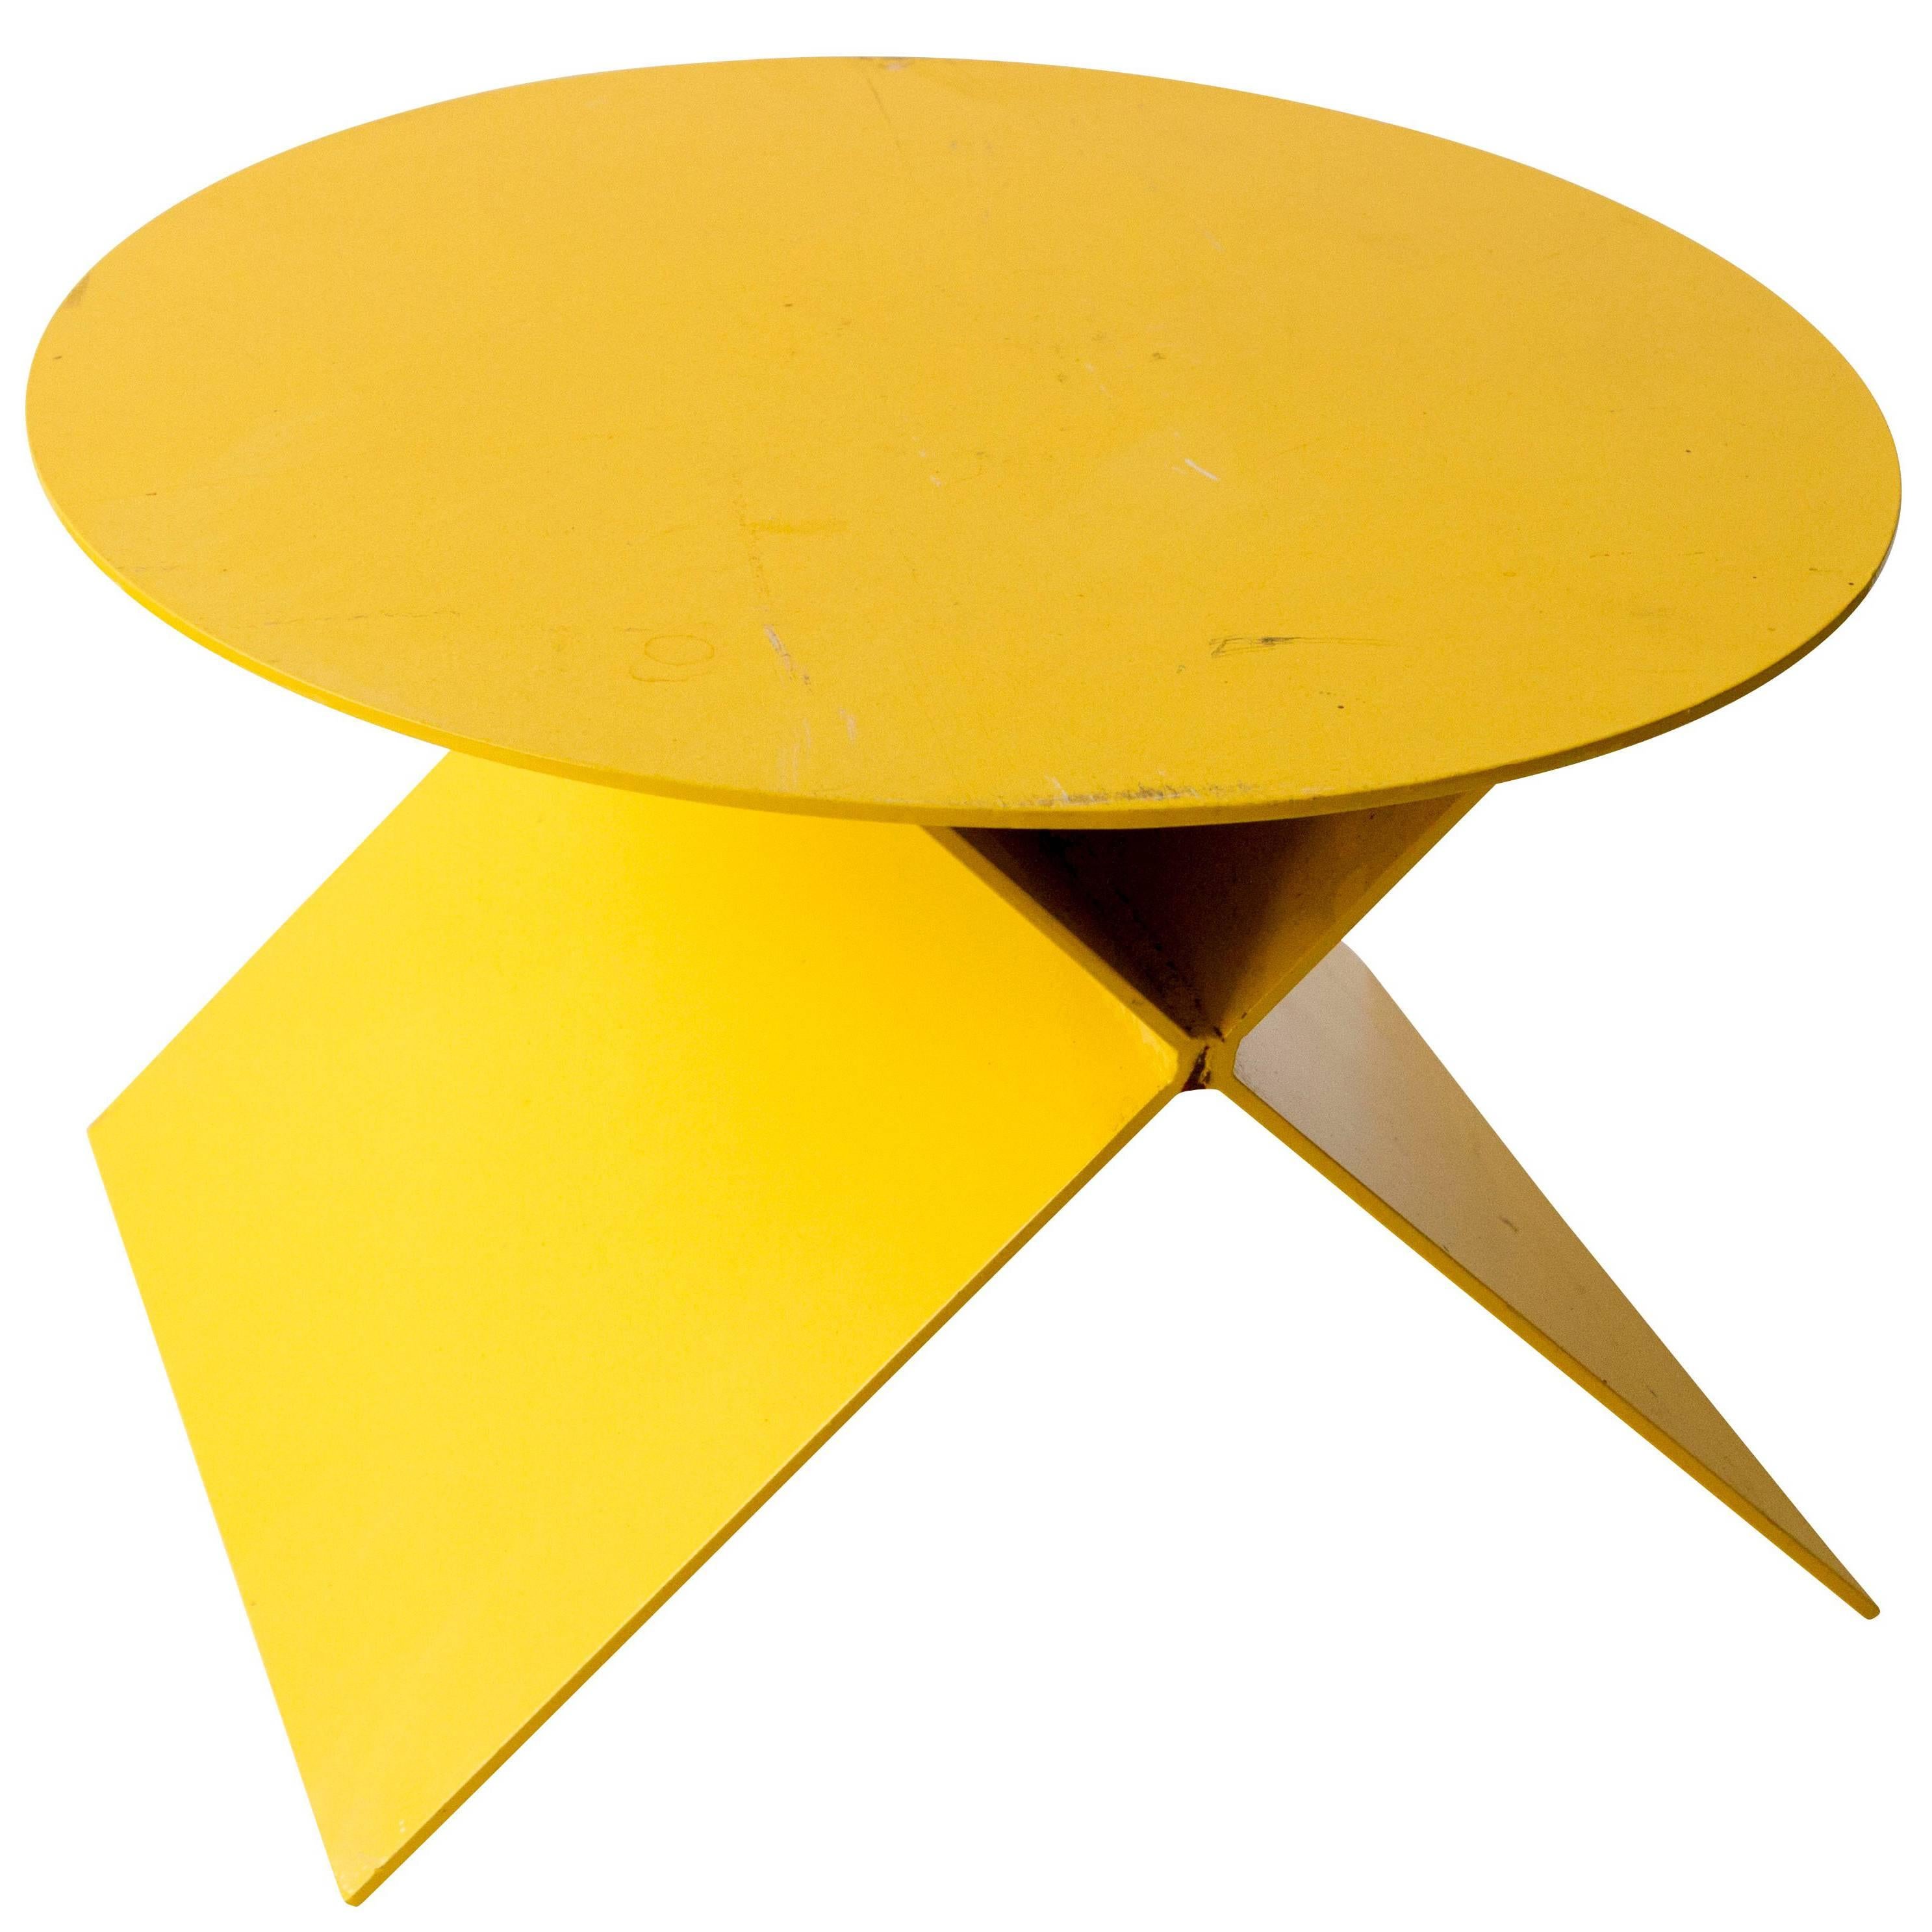 Modern Steel Plate Side Table in Chromium Yellow